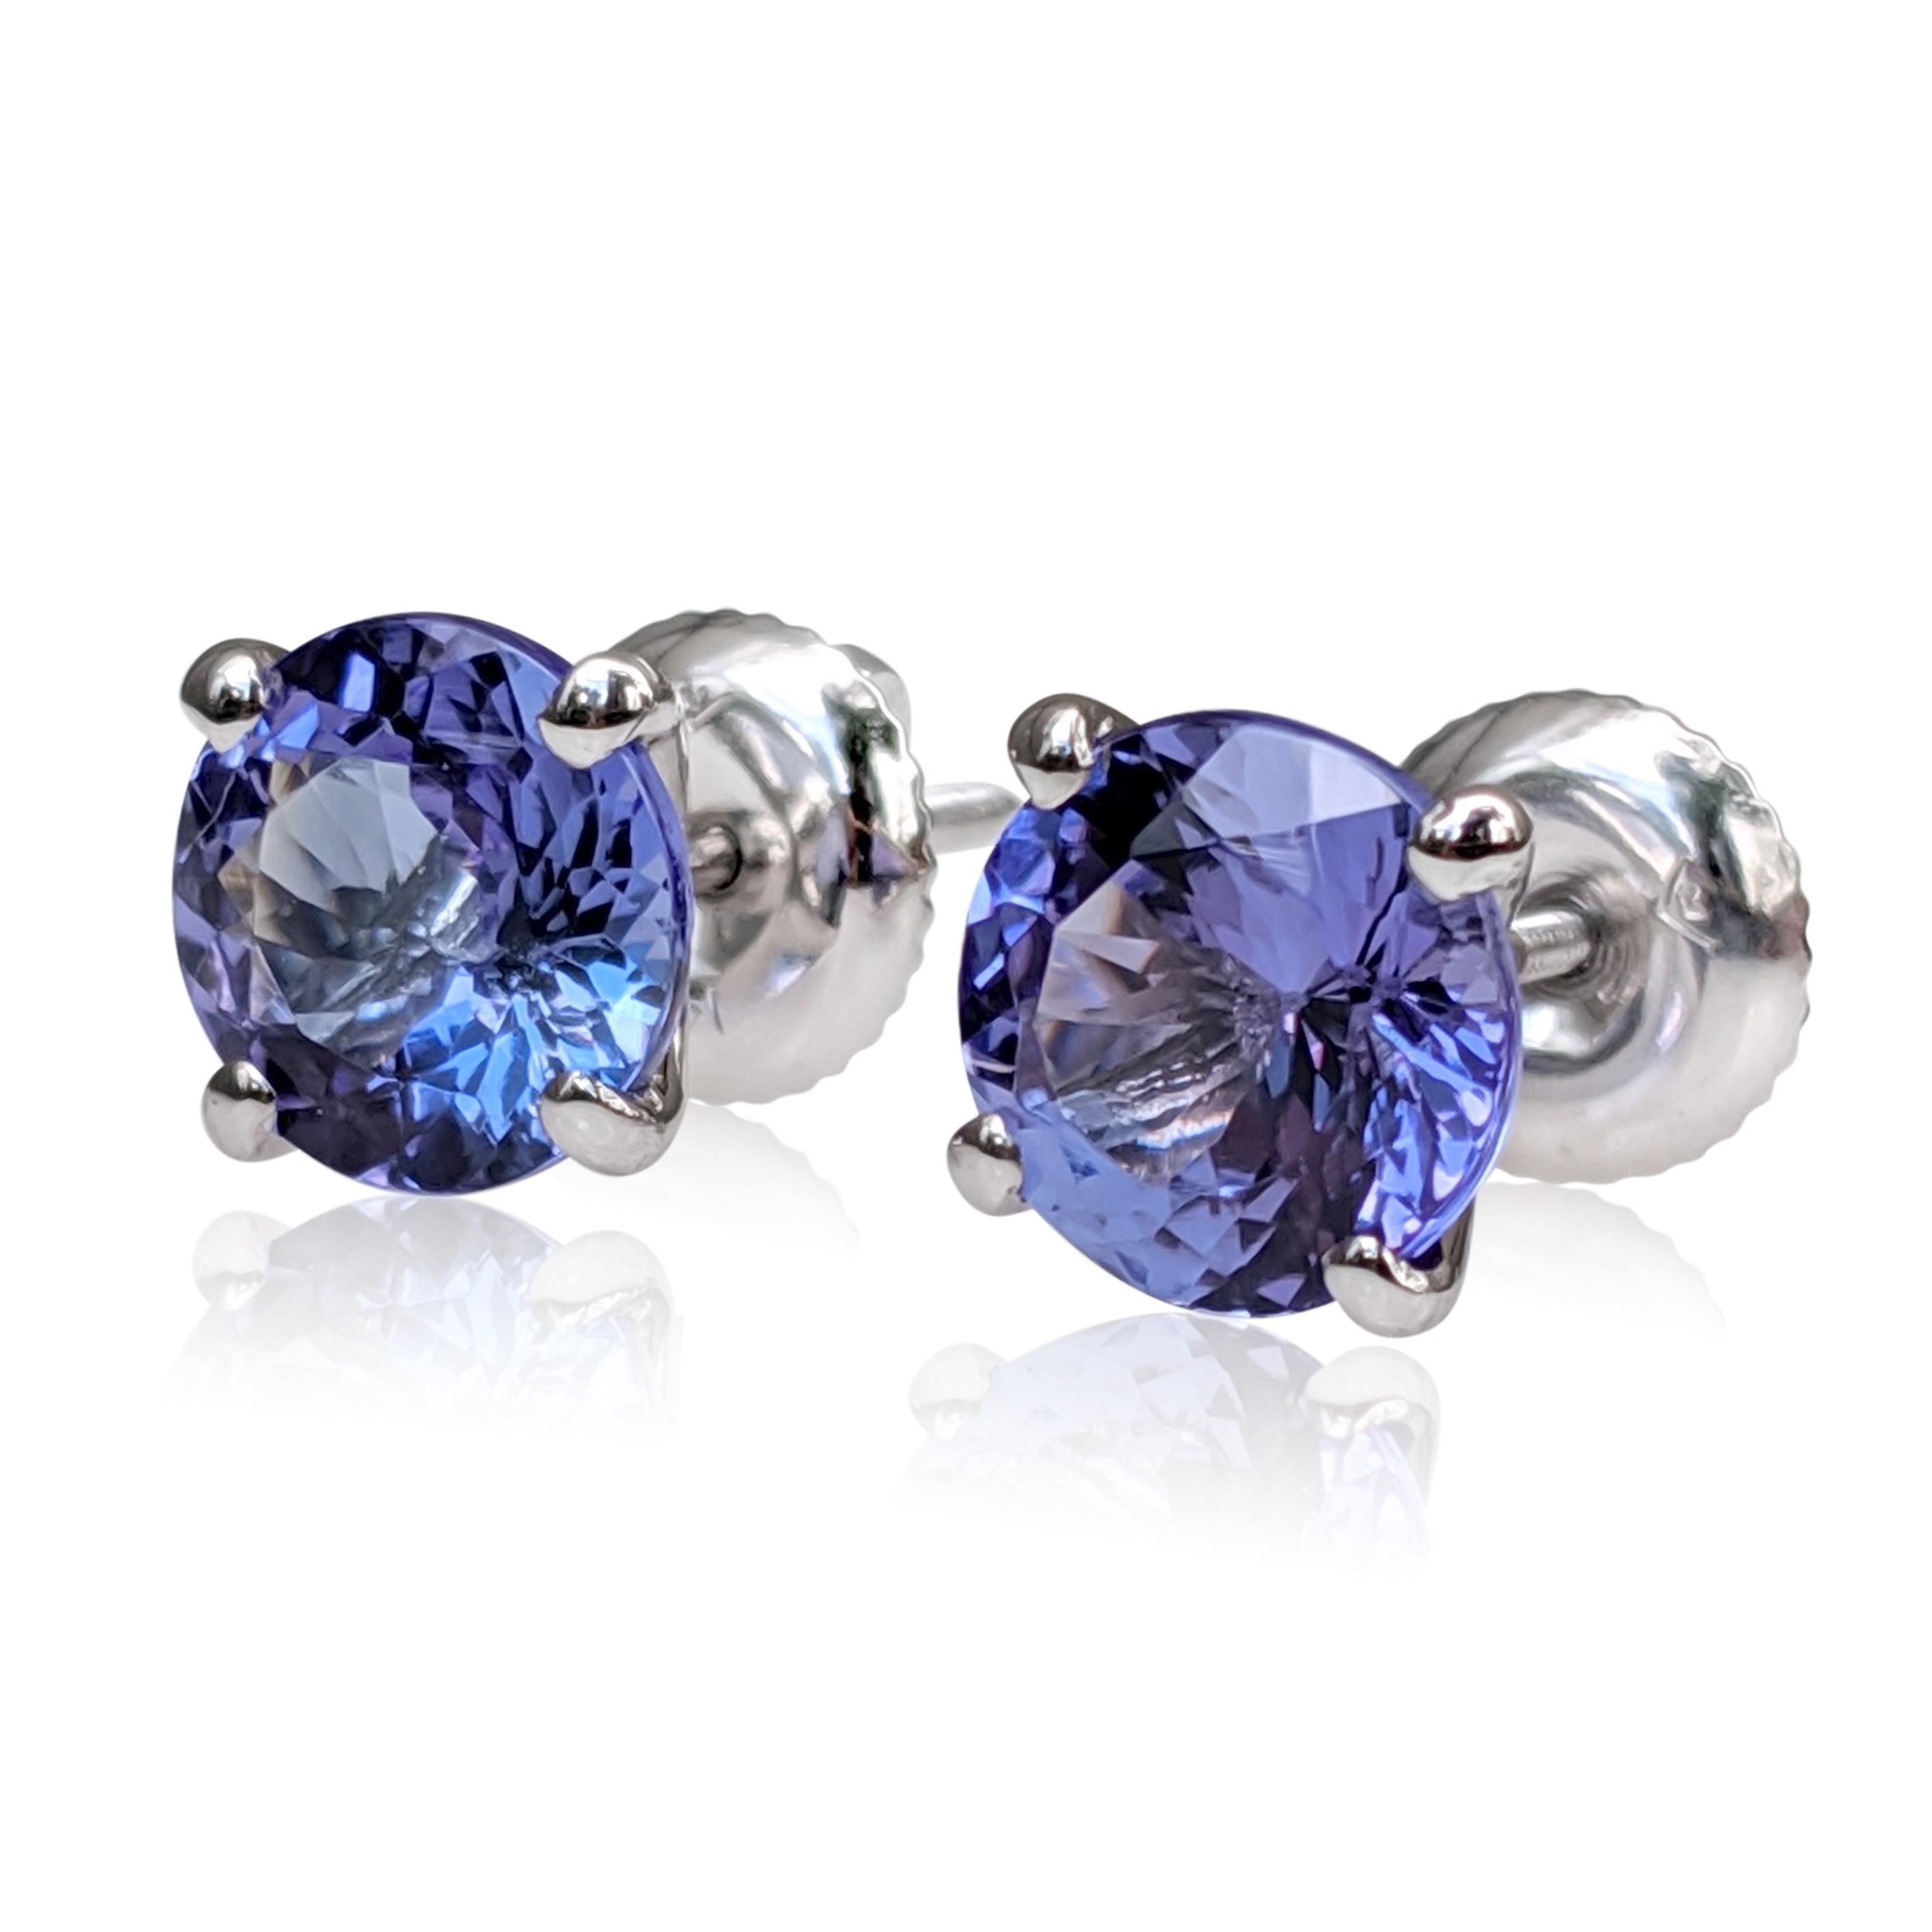 Women's NO RESERVE! 2.79 Carat Tanzanite - 14 kt. White gold - Earrings For Sale